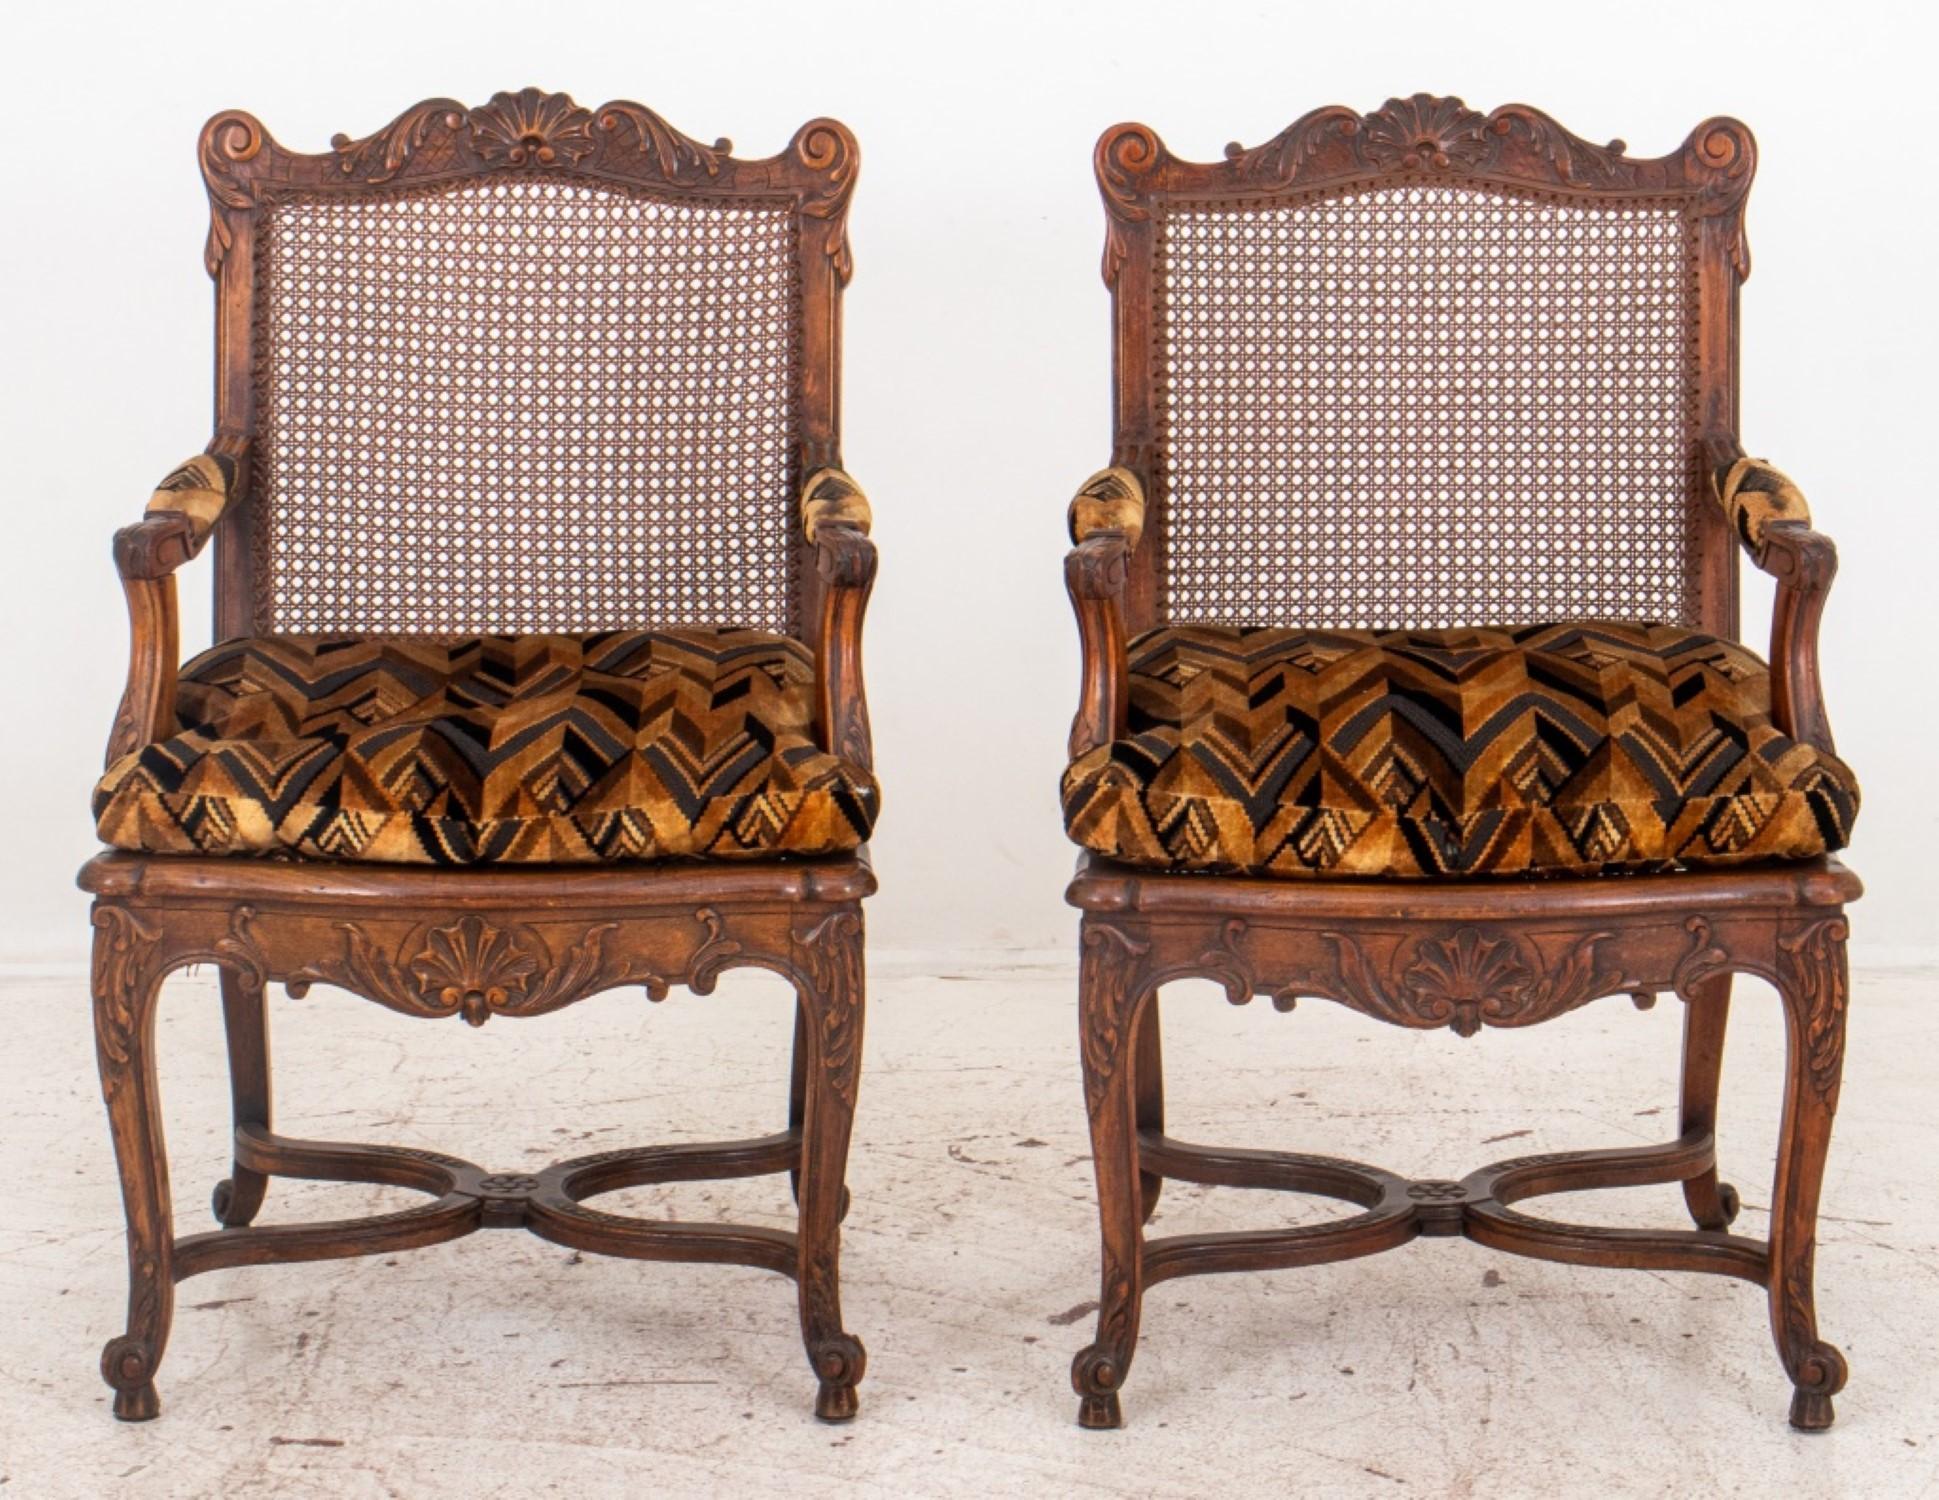 French Louis XV style pair of oak armchair or fauteuil a la reine raised on cabriole legs joined by stretchers with carved shell and acanthus foliage motif to backrest and apron, having caned seat and back, circa nineteenth century.

Dealer: S138XX